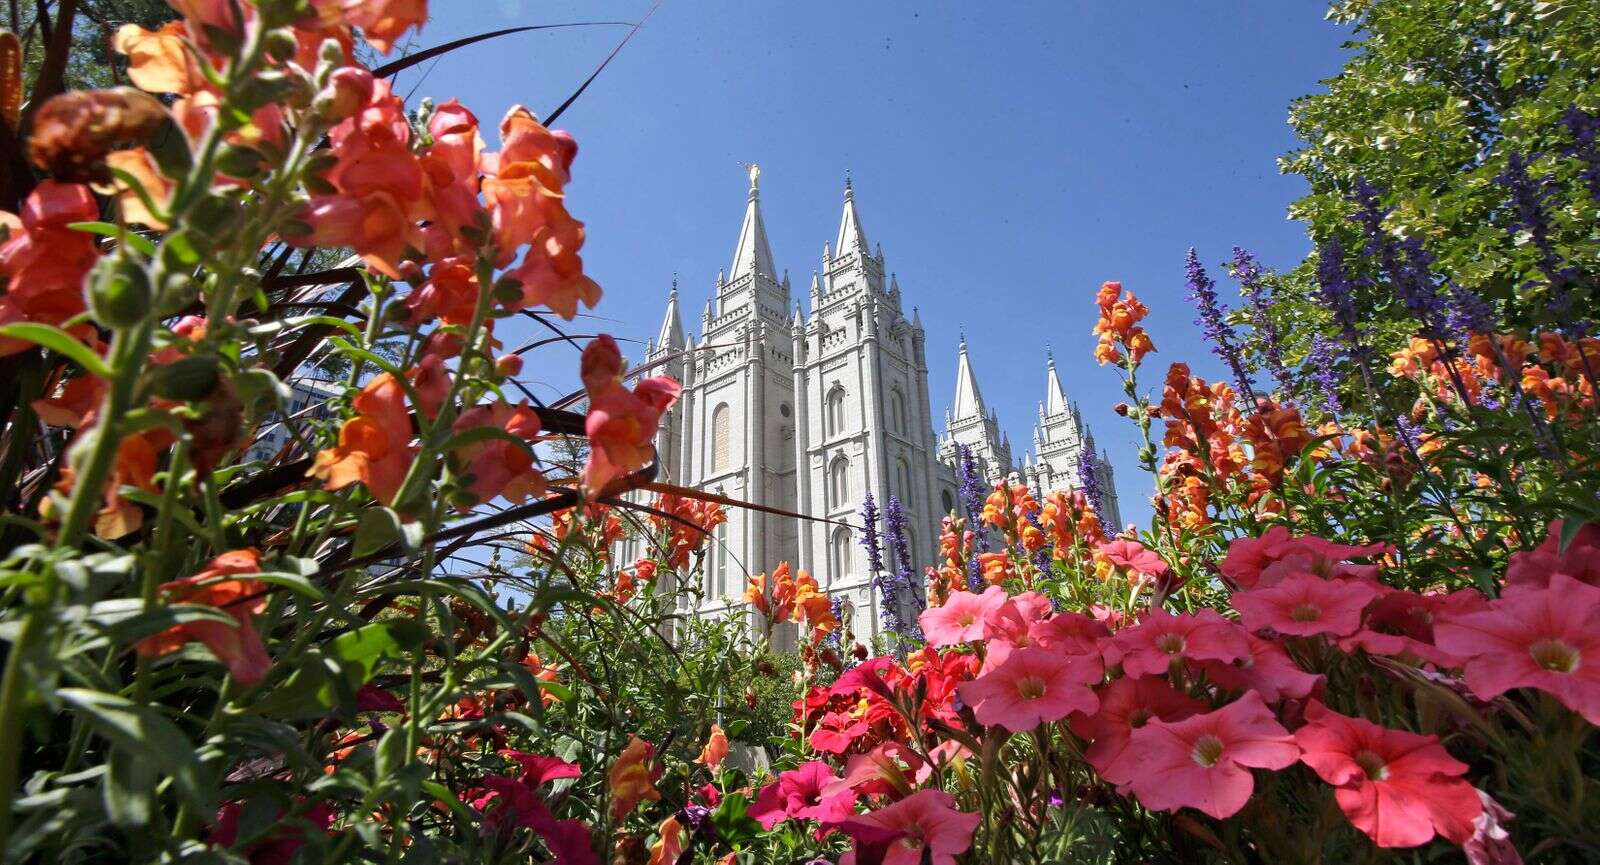 Mormon church comes out in support of same-sex marriage law